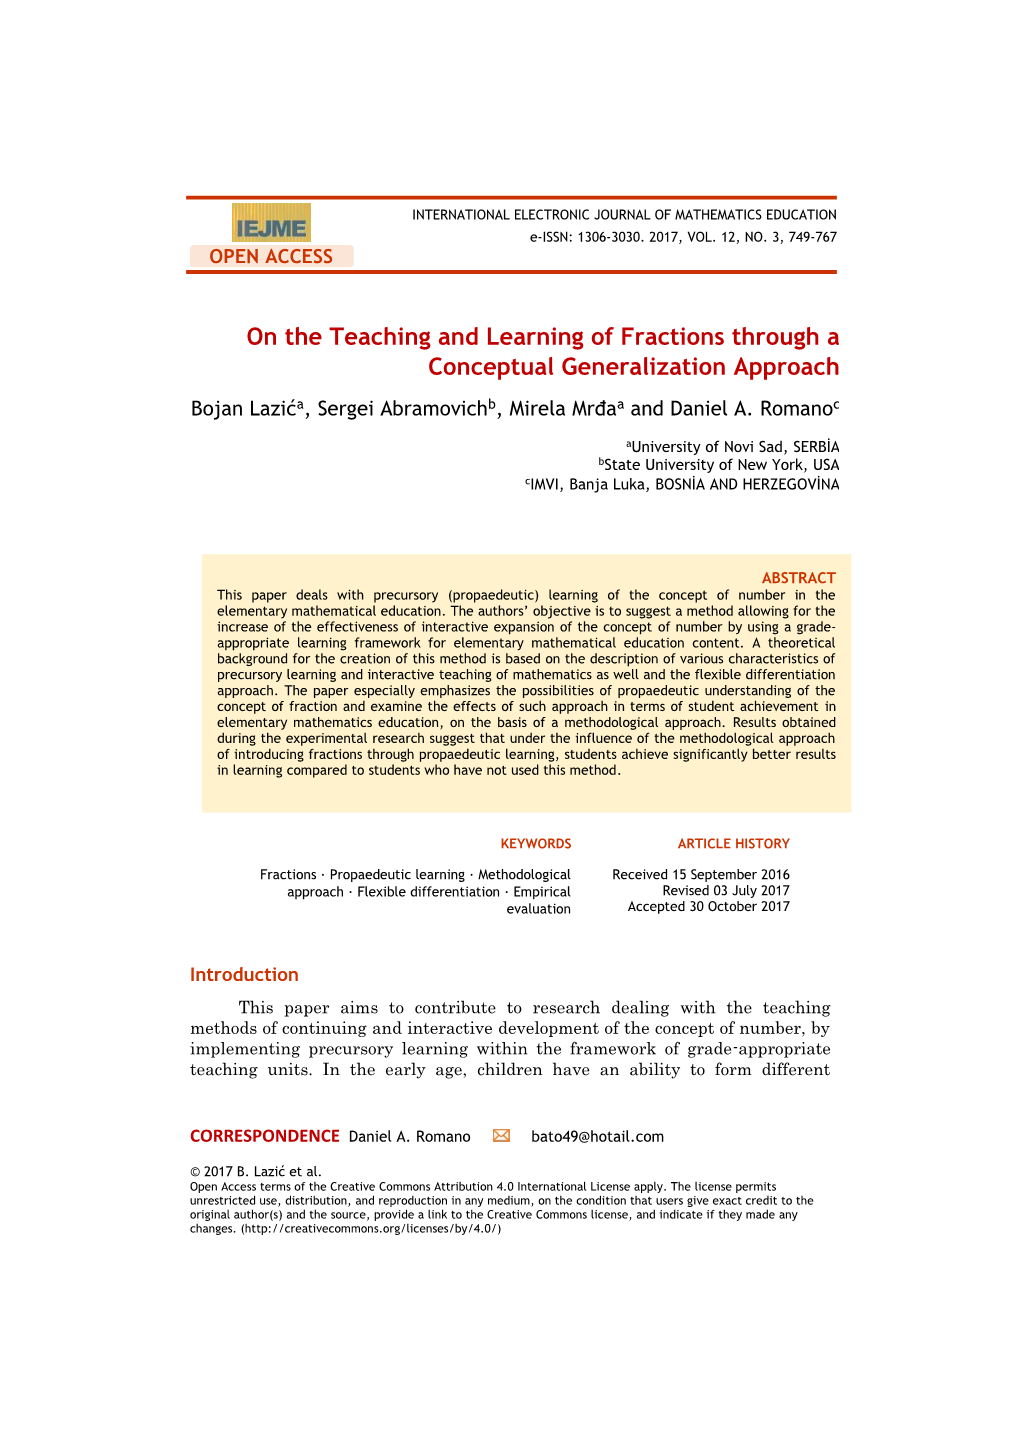 On the Teaching and Learning of Fractions Through a Conceptual Generalization Approach